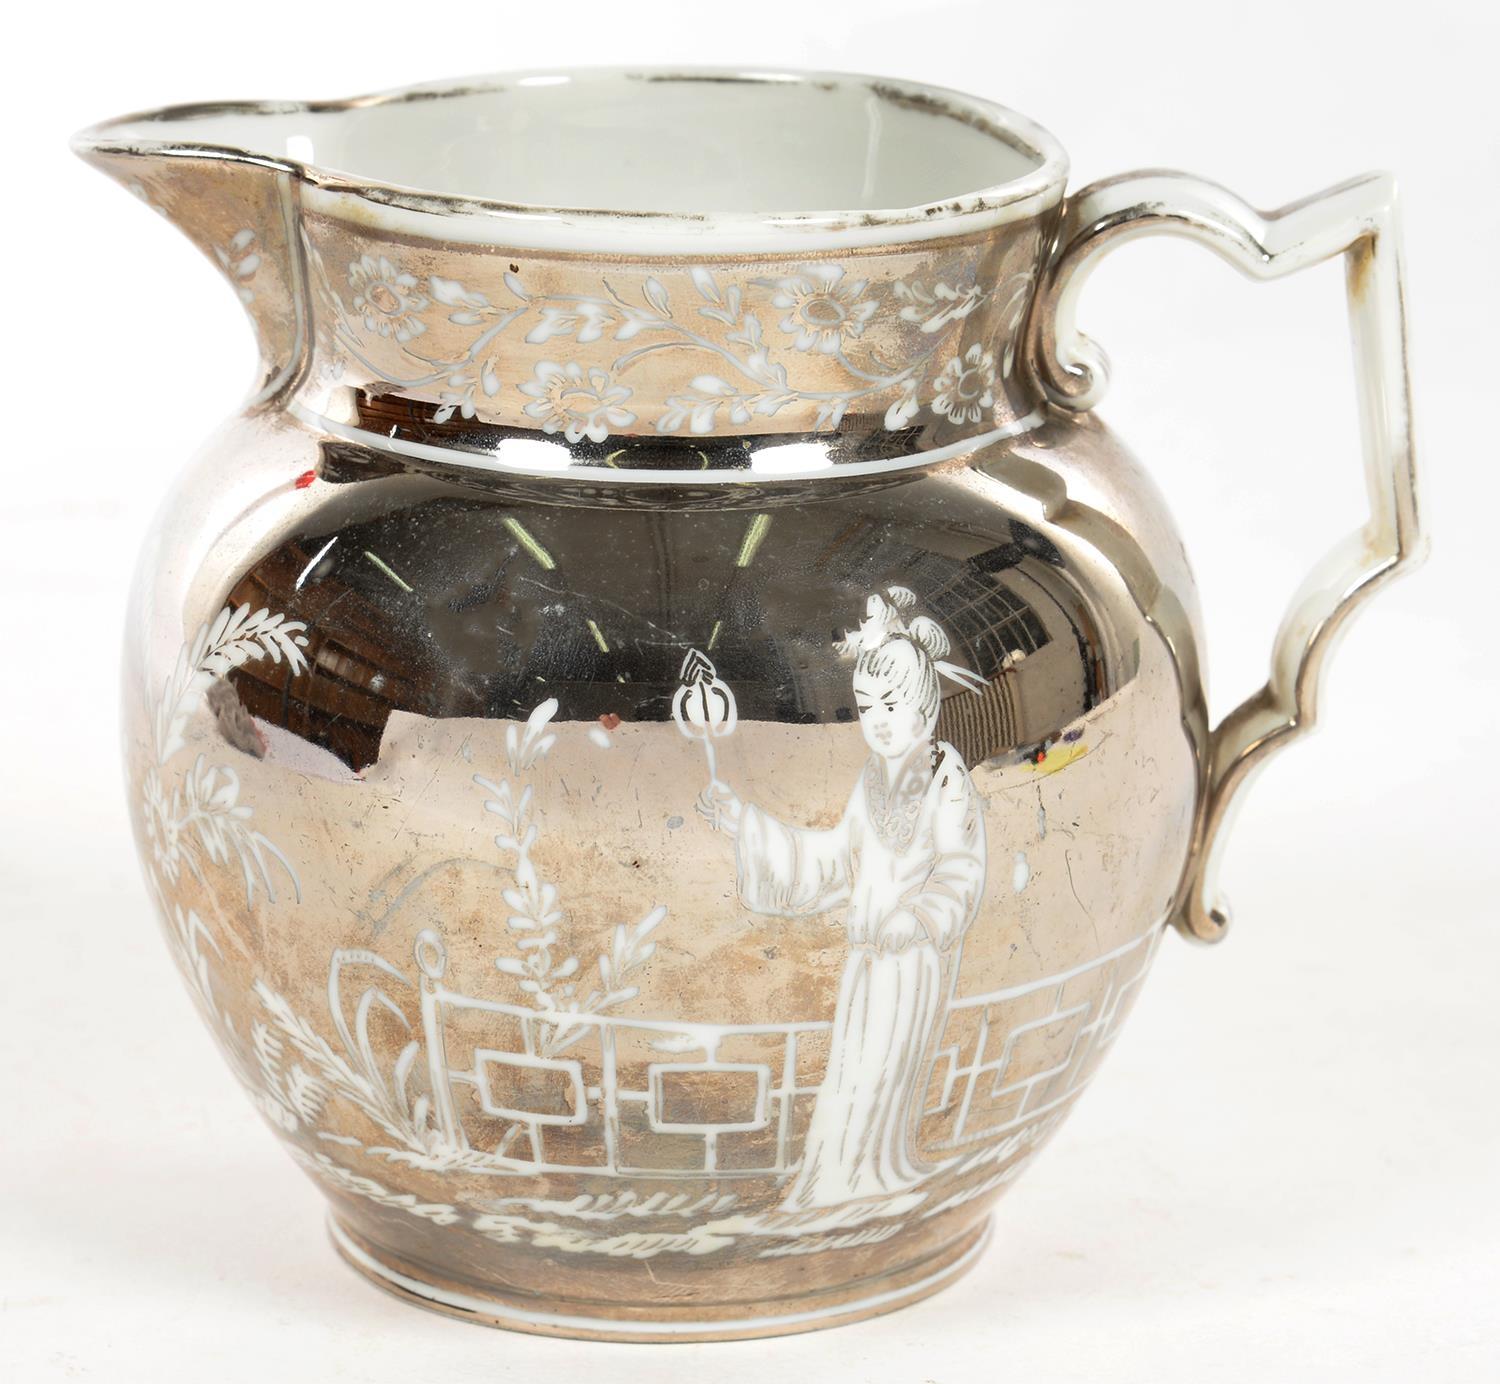 A STAFFORDSHIRE SILVER RESIST DECORATED JUG, 13CM H, 19TH C - Image 2 of 2